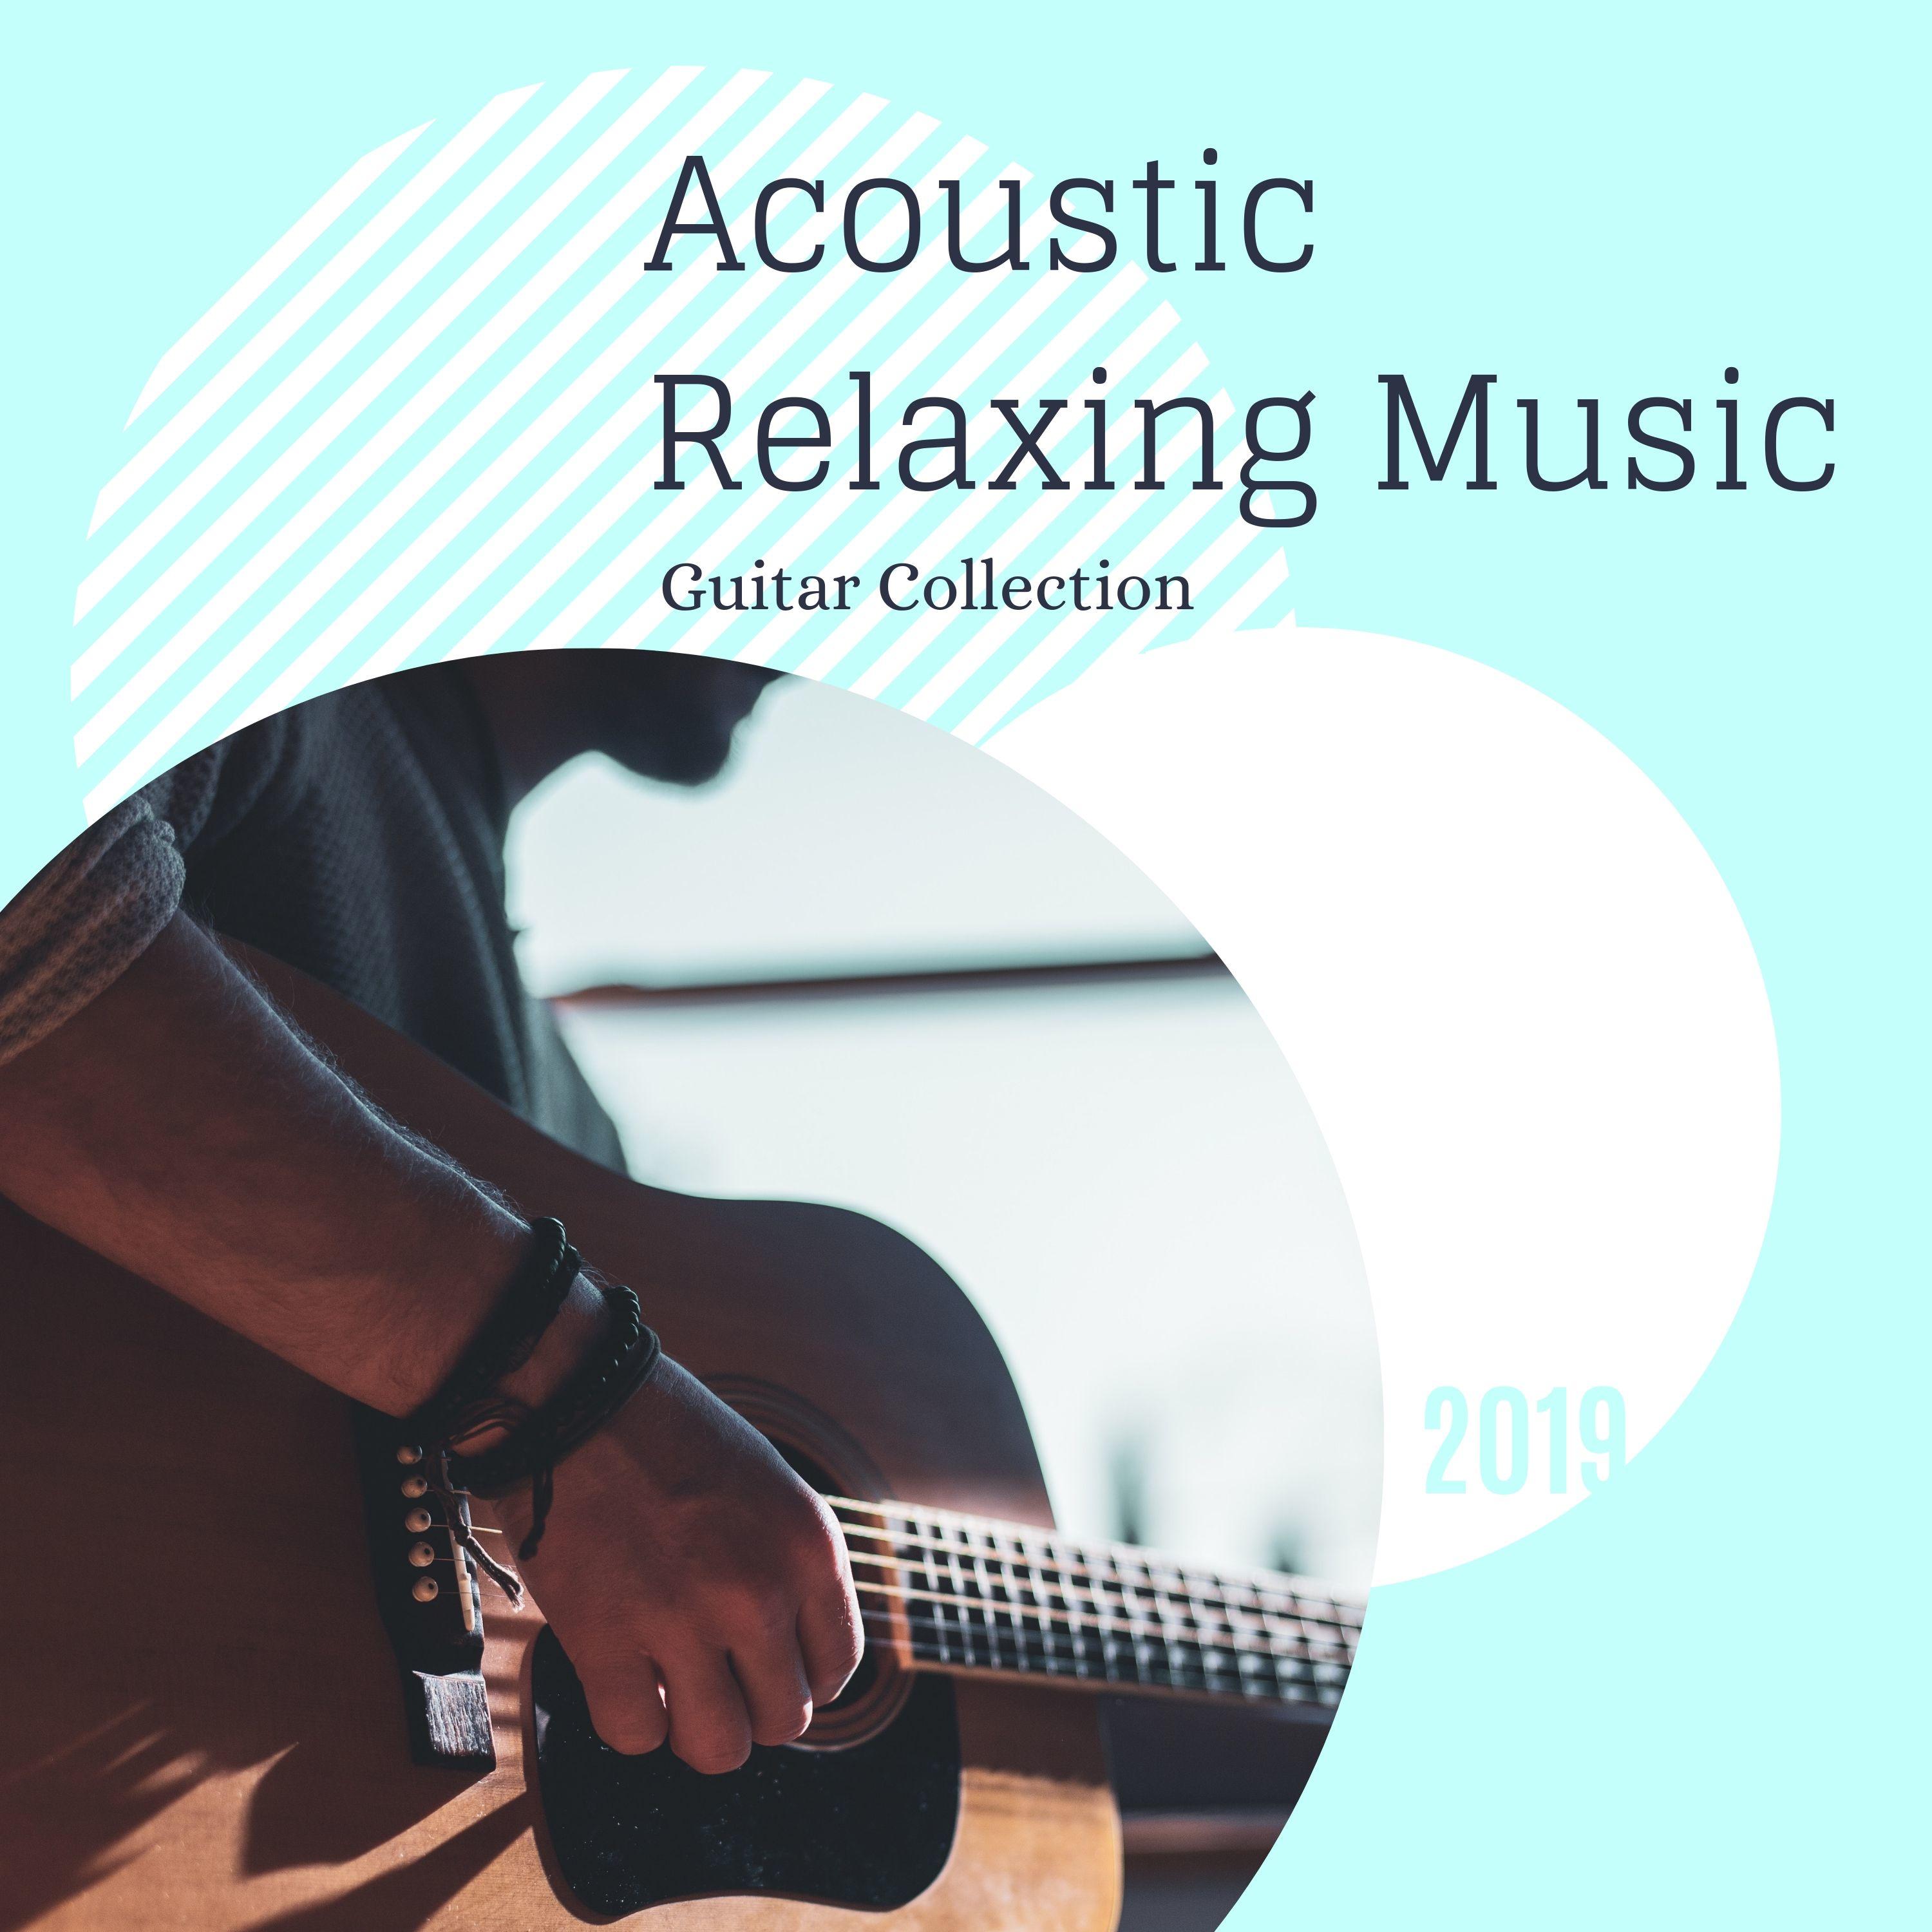 Acoustic Relaxing Music